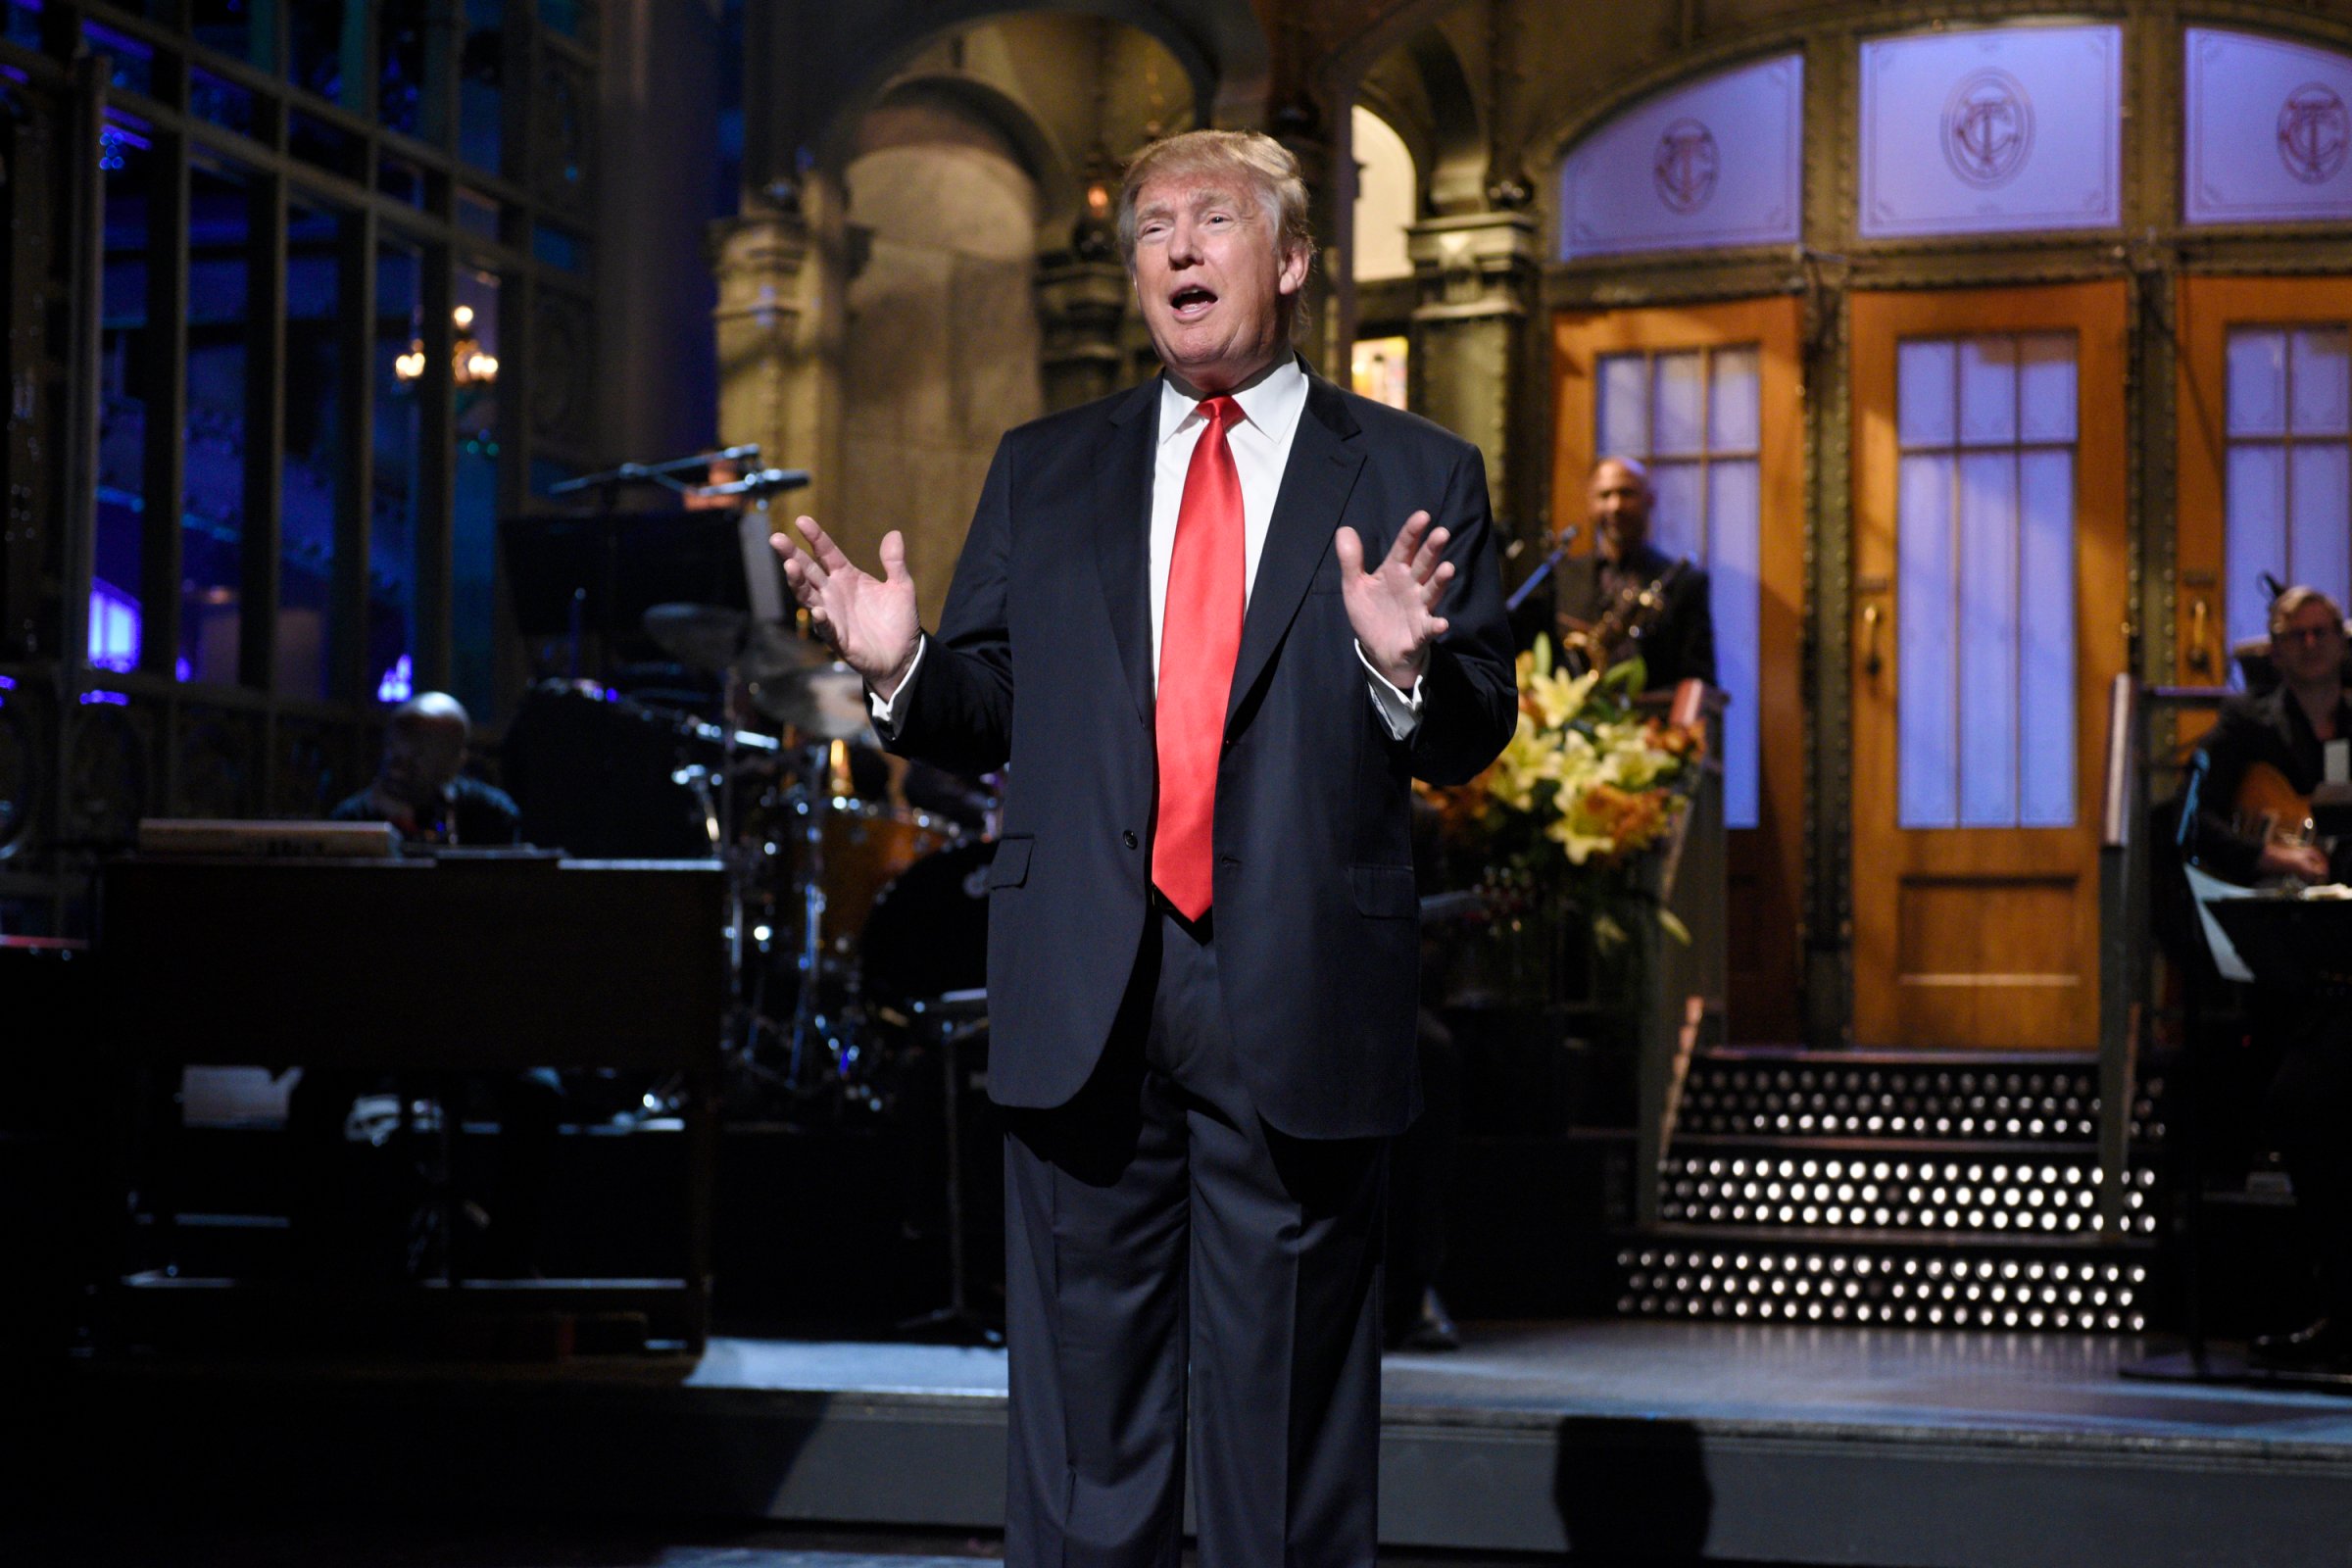 Donald Trump during the "Saturday Night Live" monologue on Nov 7, 2015.